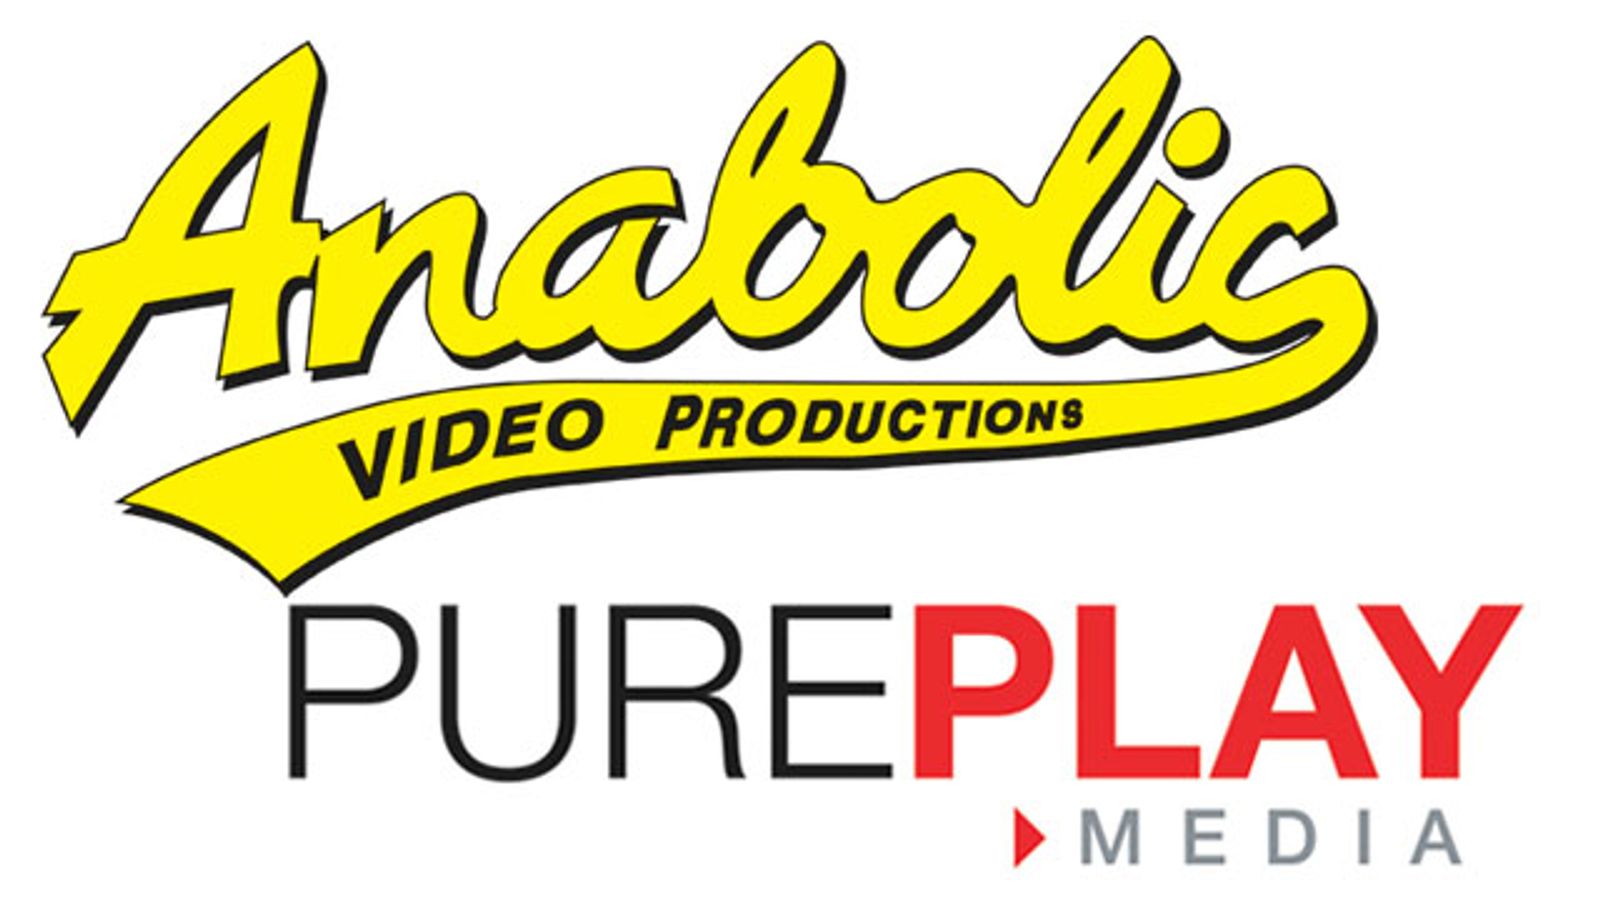 Pure Play Adds Anabolic Video to Studio Lineup